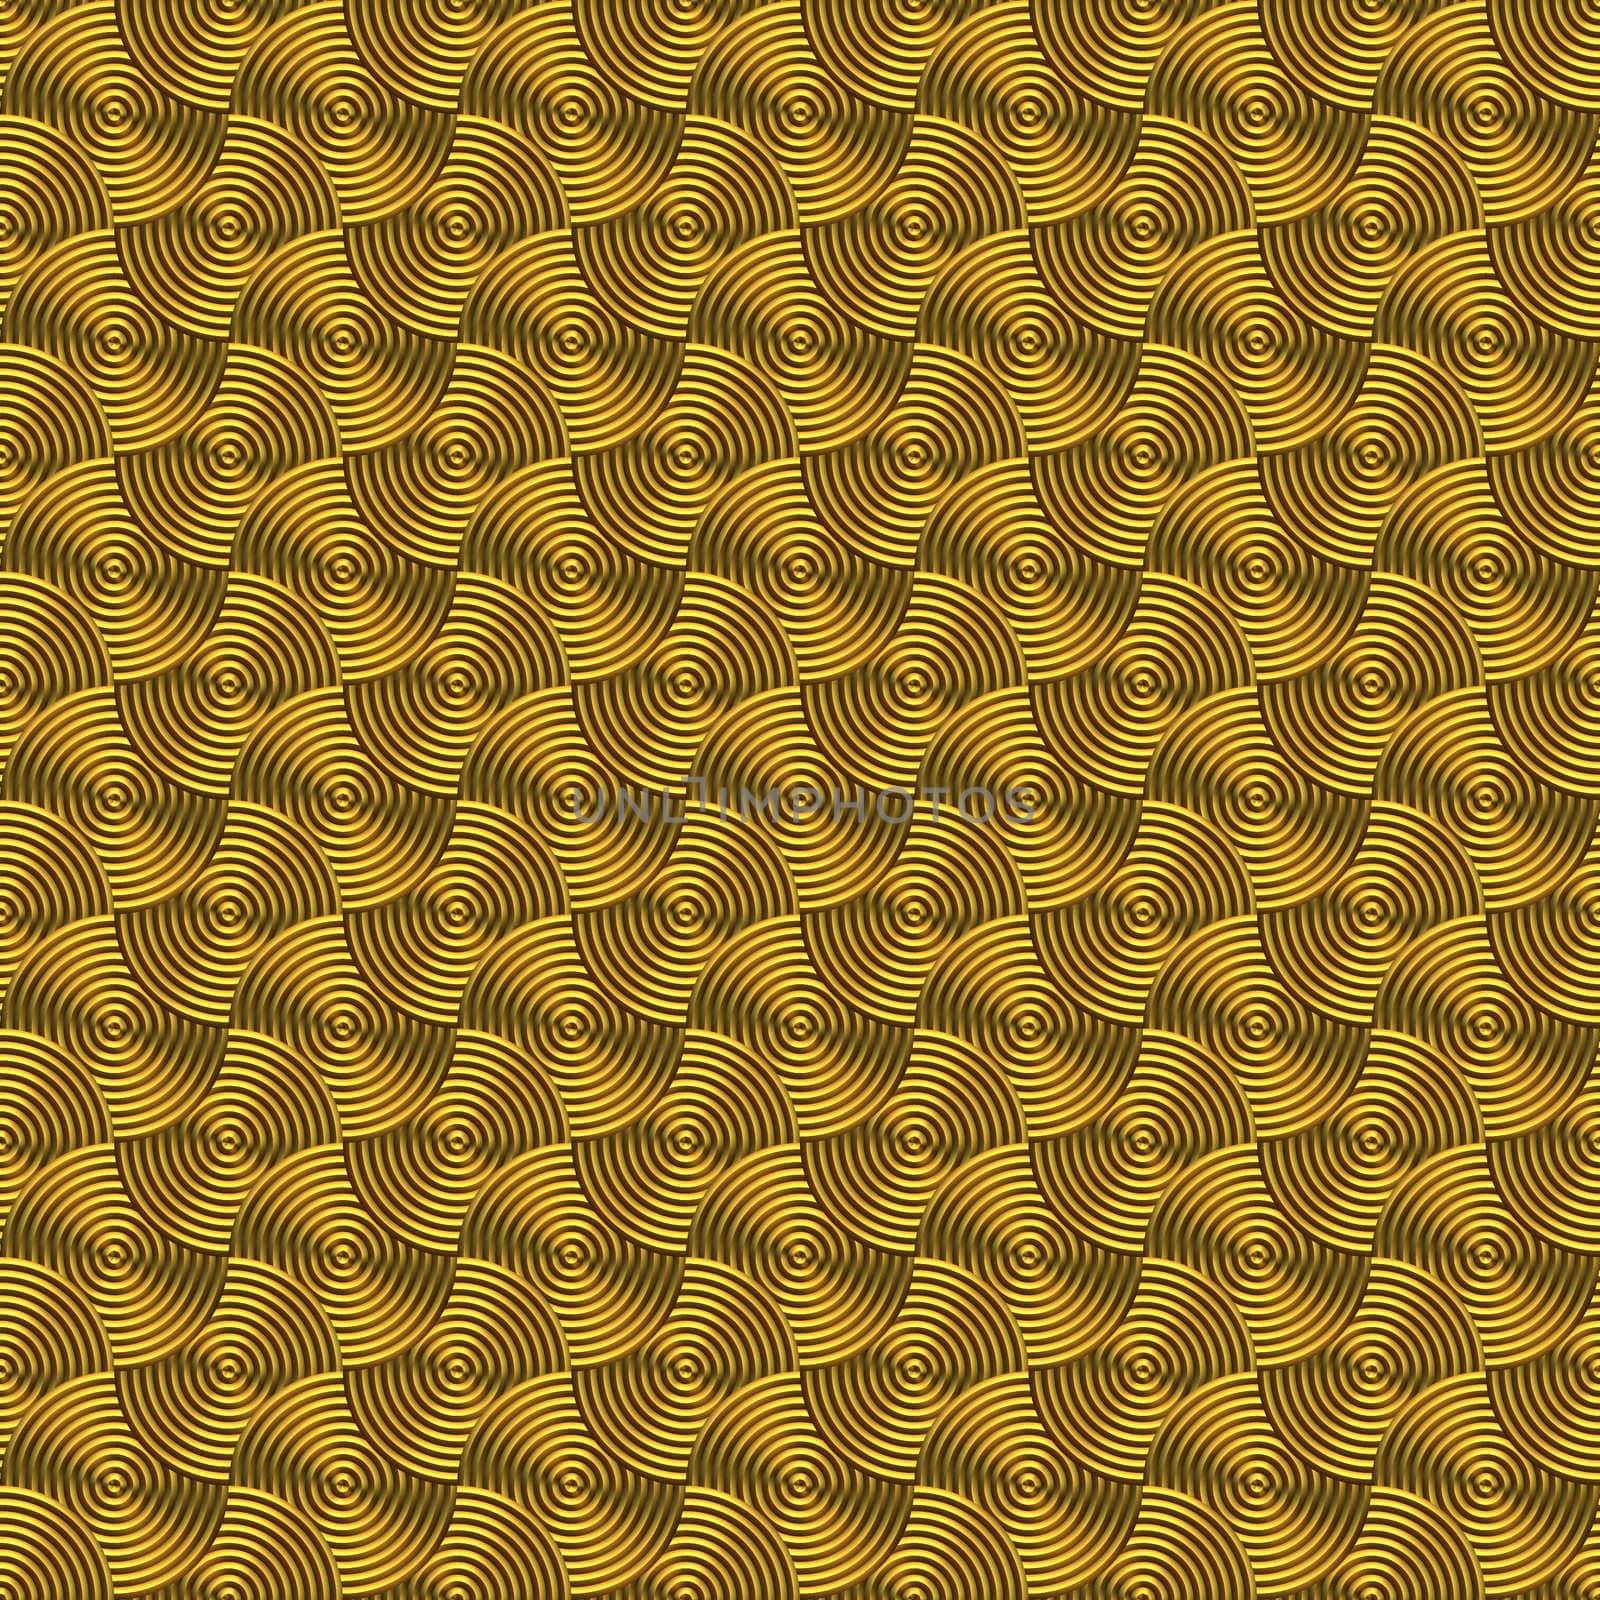 golden circles background, will tile seamlessly as a pattern